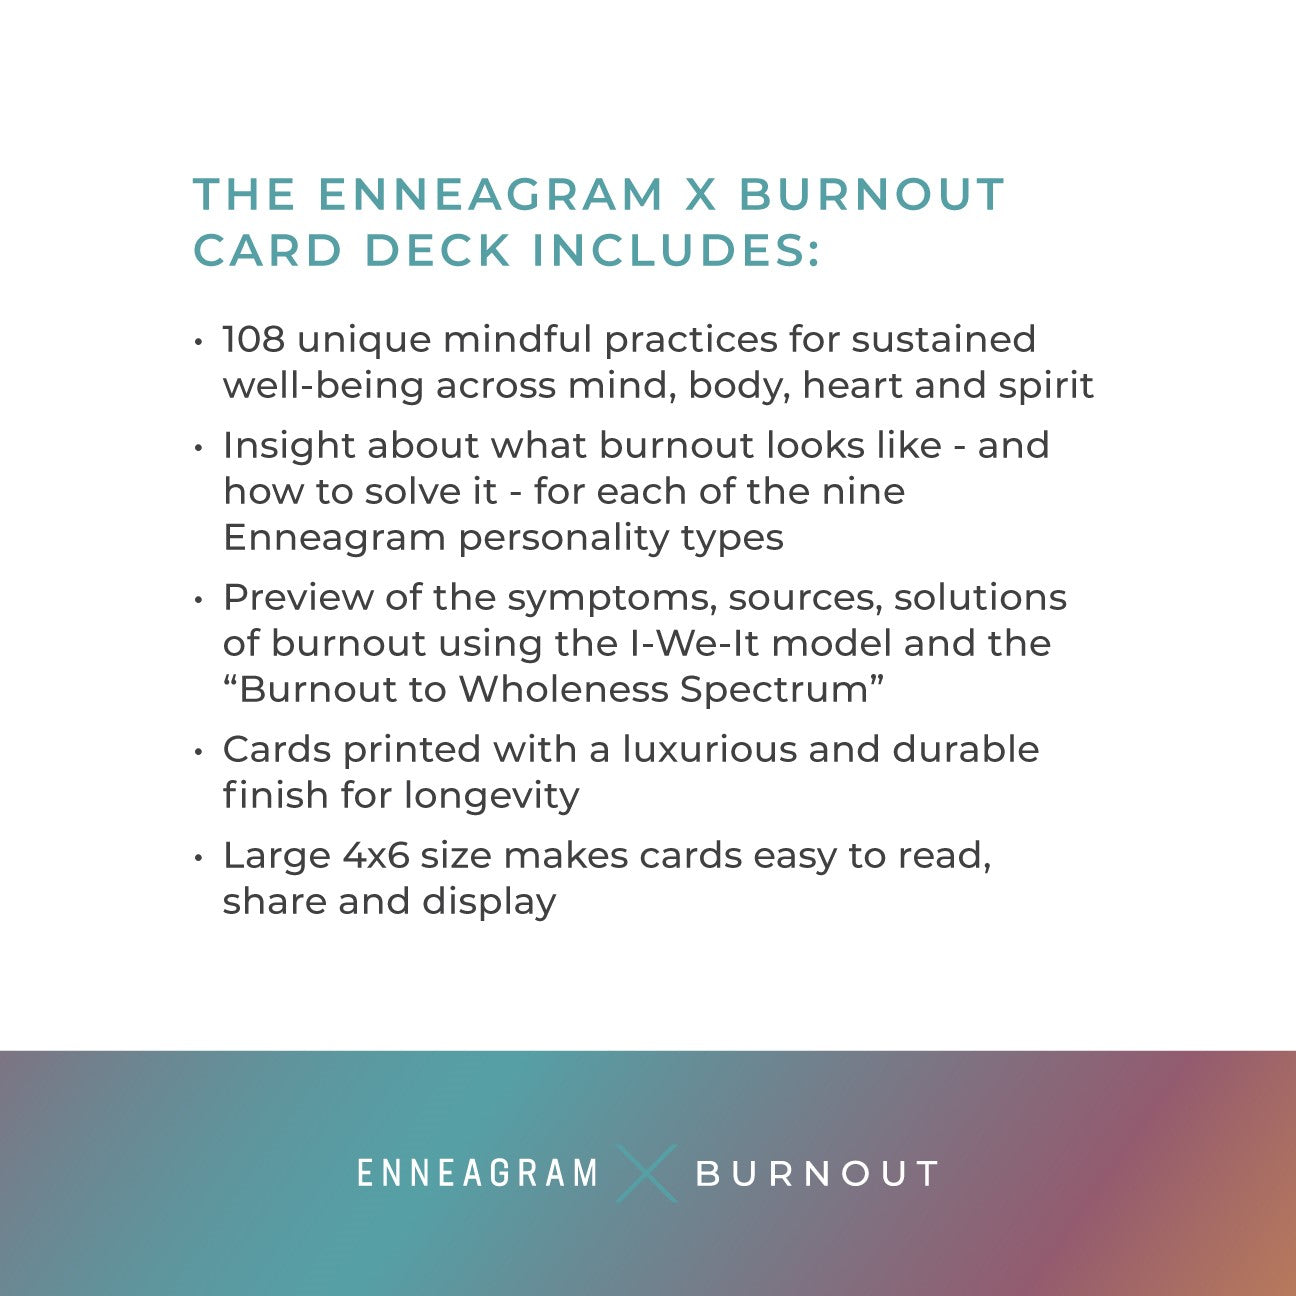 Enneagram X Burnout Card Deck: 108 Unique Mindful Practices for Sustained Well-being in Mind, Body, Heart, and Spirit. 20% Off Through 12/8 With Code: WHOLE20